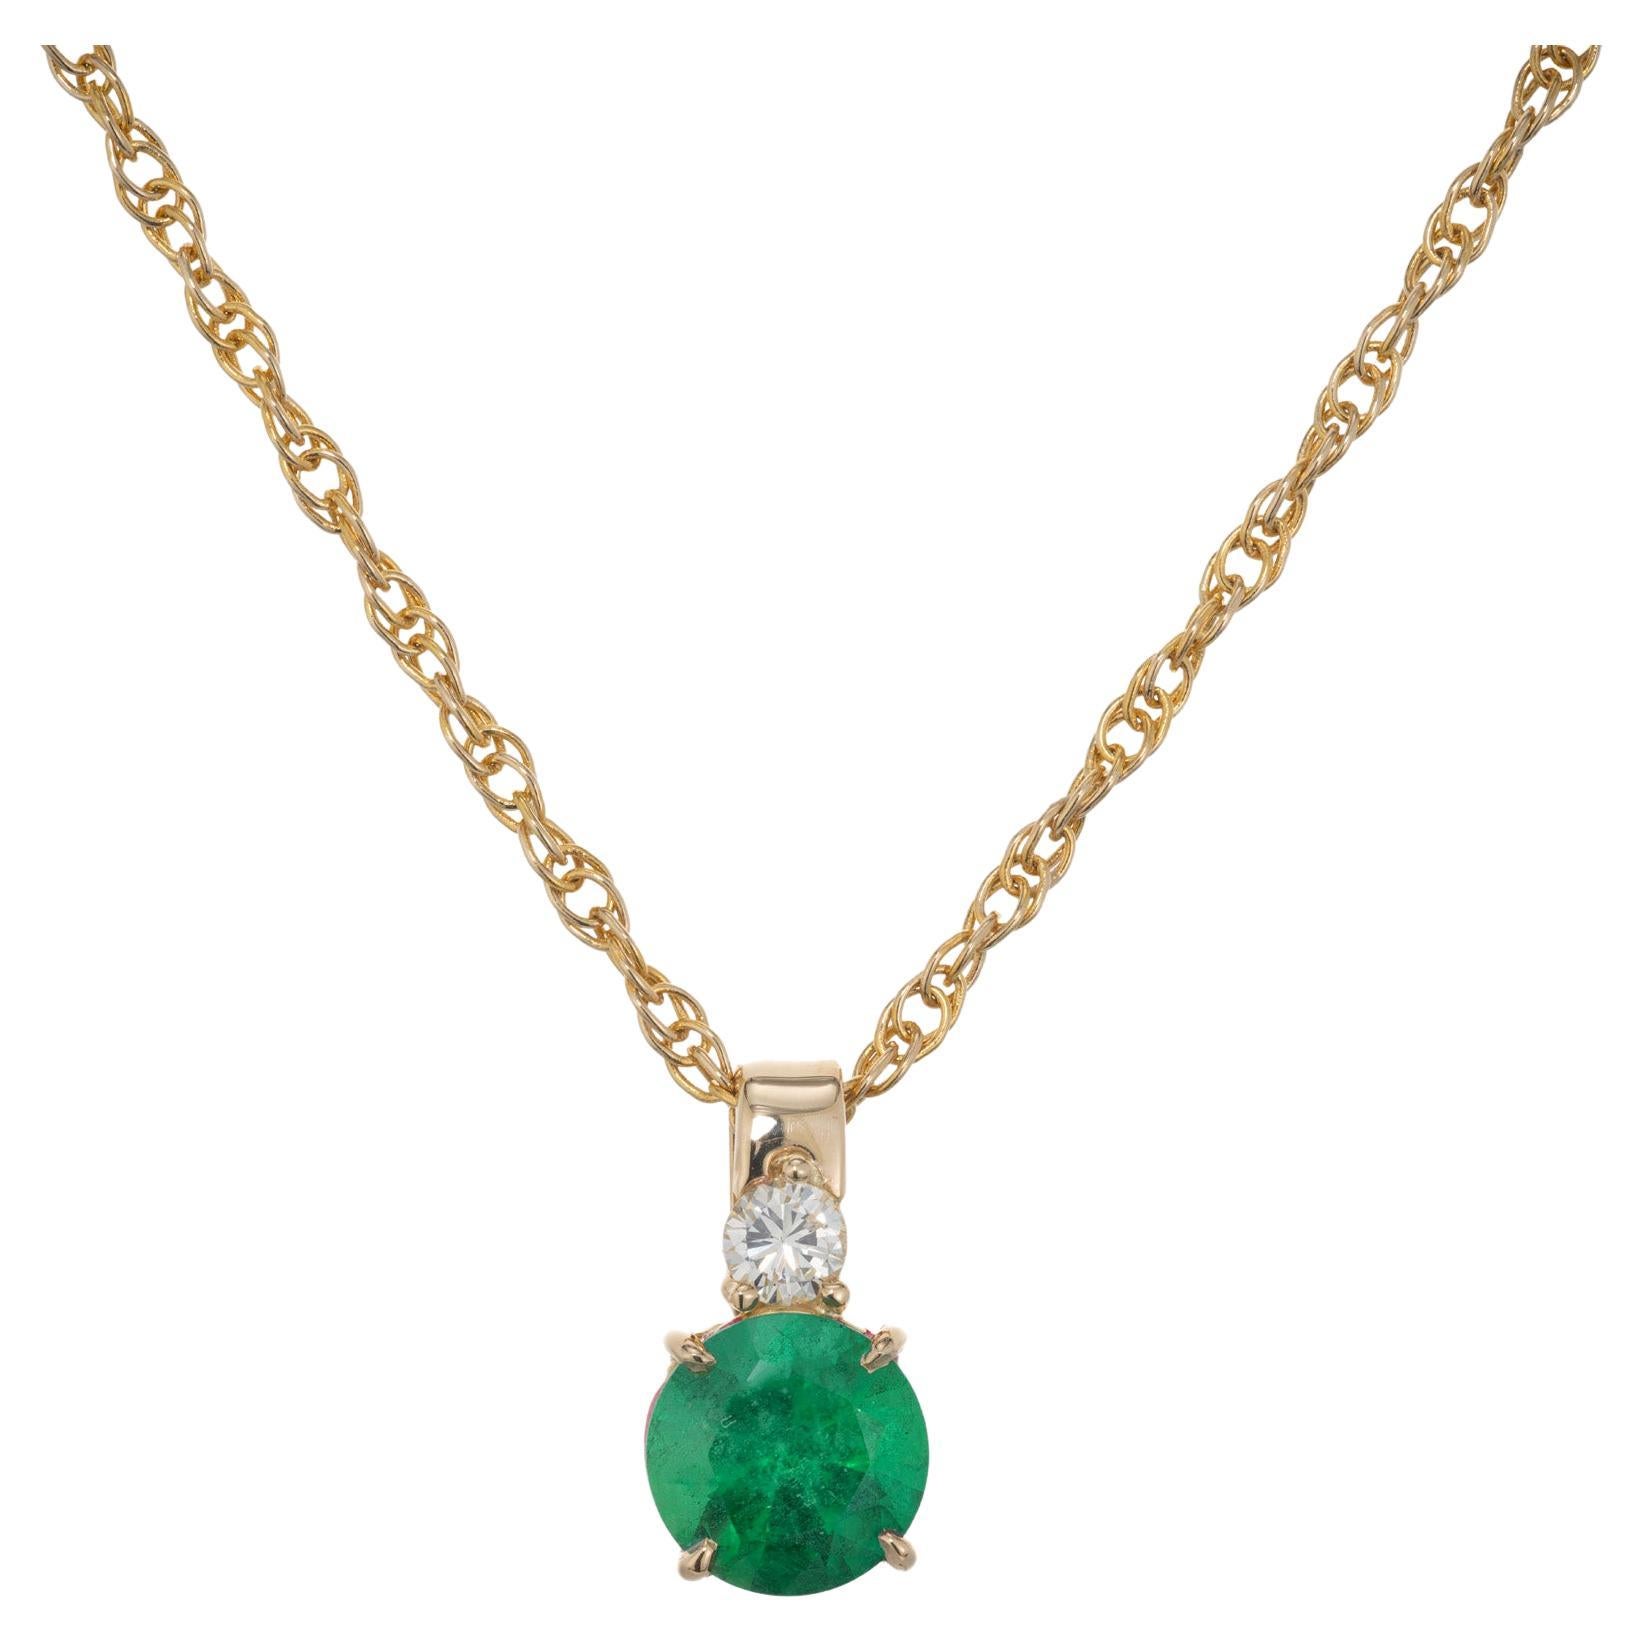 Peter Suchy GIA Certified 1.08 Carat Emerald Diamond Gold Pendant Necklace For Sale